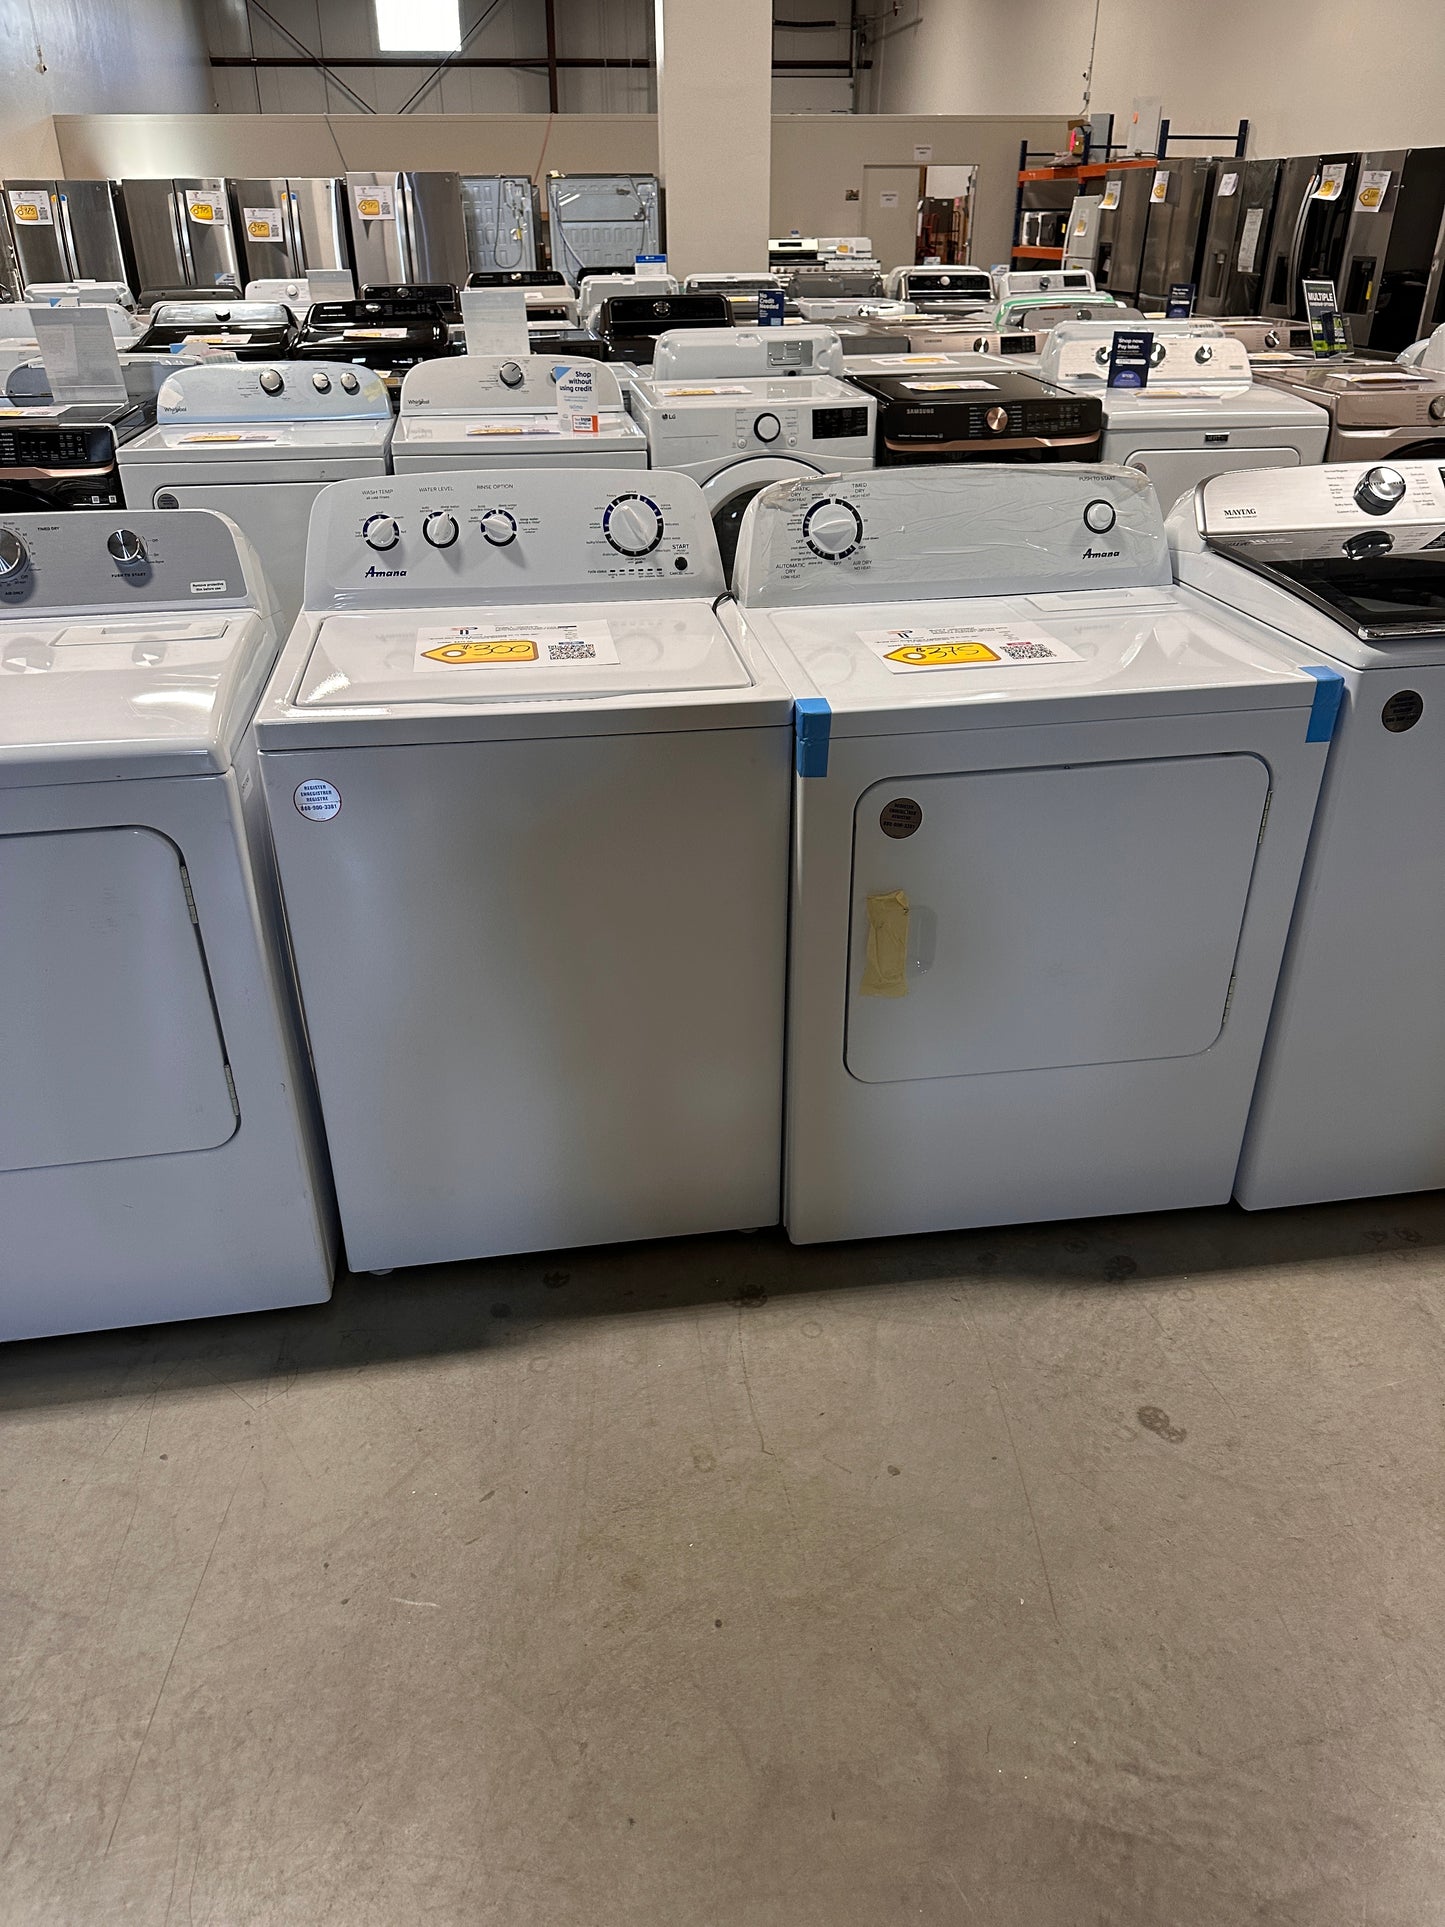 GORGEOUS NEW TOP LOAD WASHER ELECTRIC DRYER LAUNDRY SET - WAS13094 DRY12444